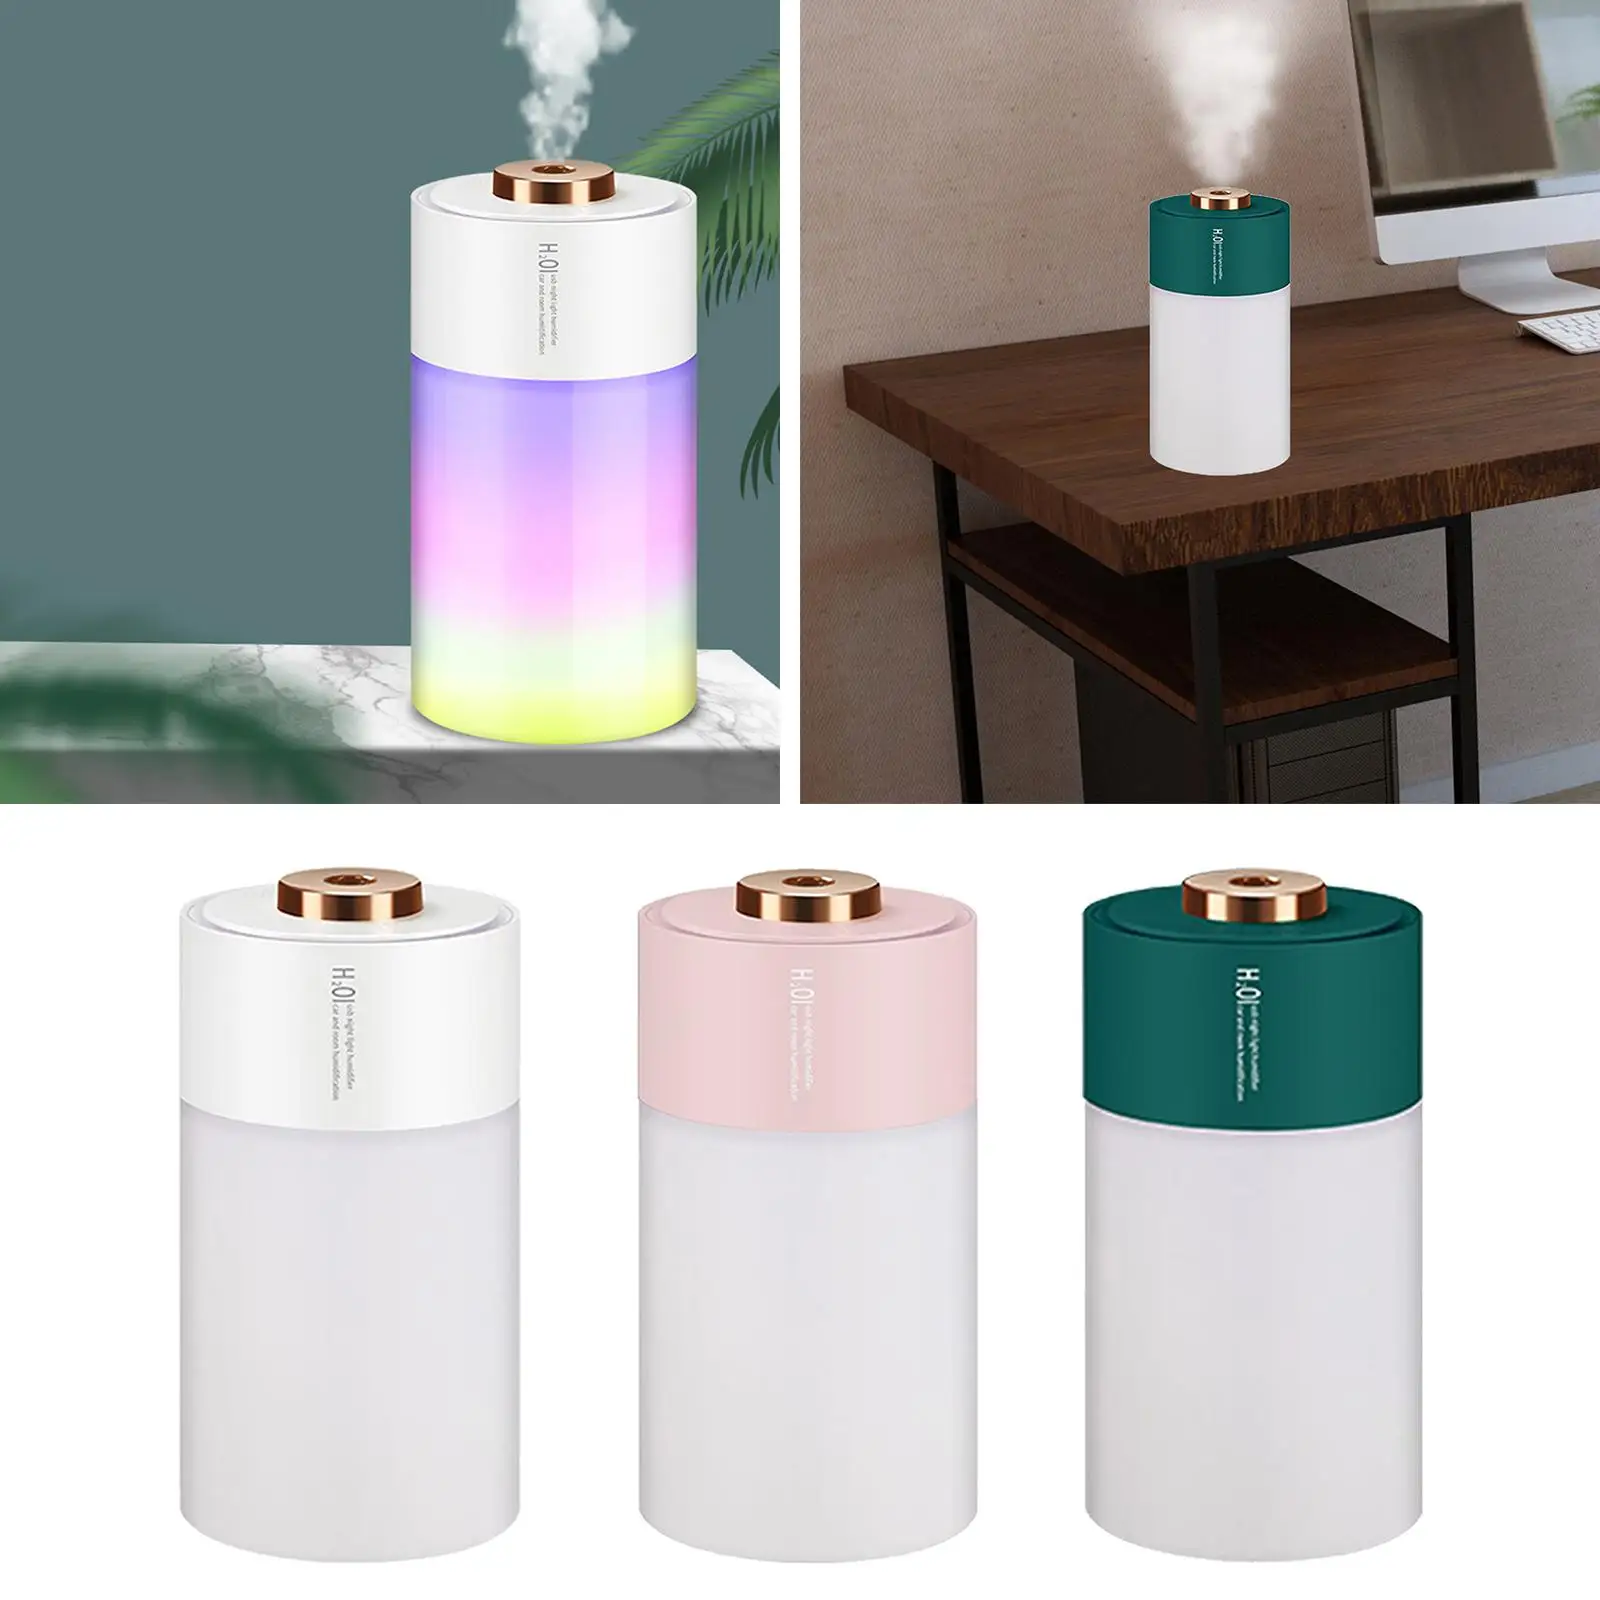 Portable Mist Humidifier Diffuser Quiet USB LED Ultrasonic Atomizer Purifier for Desk